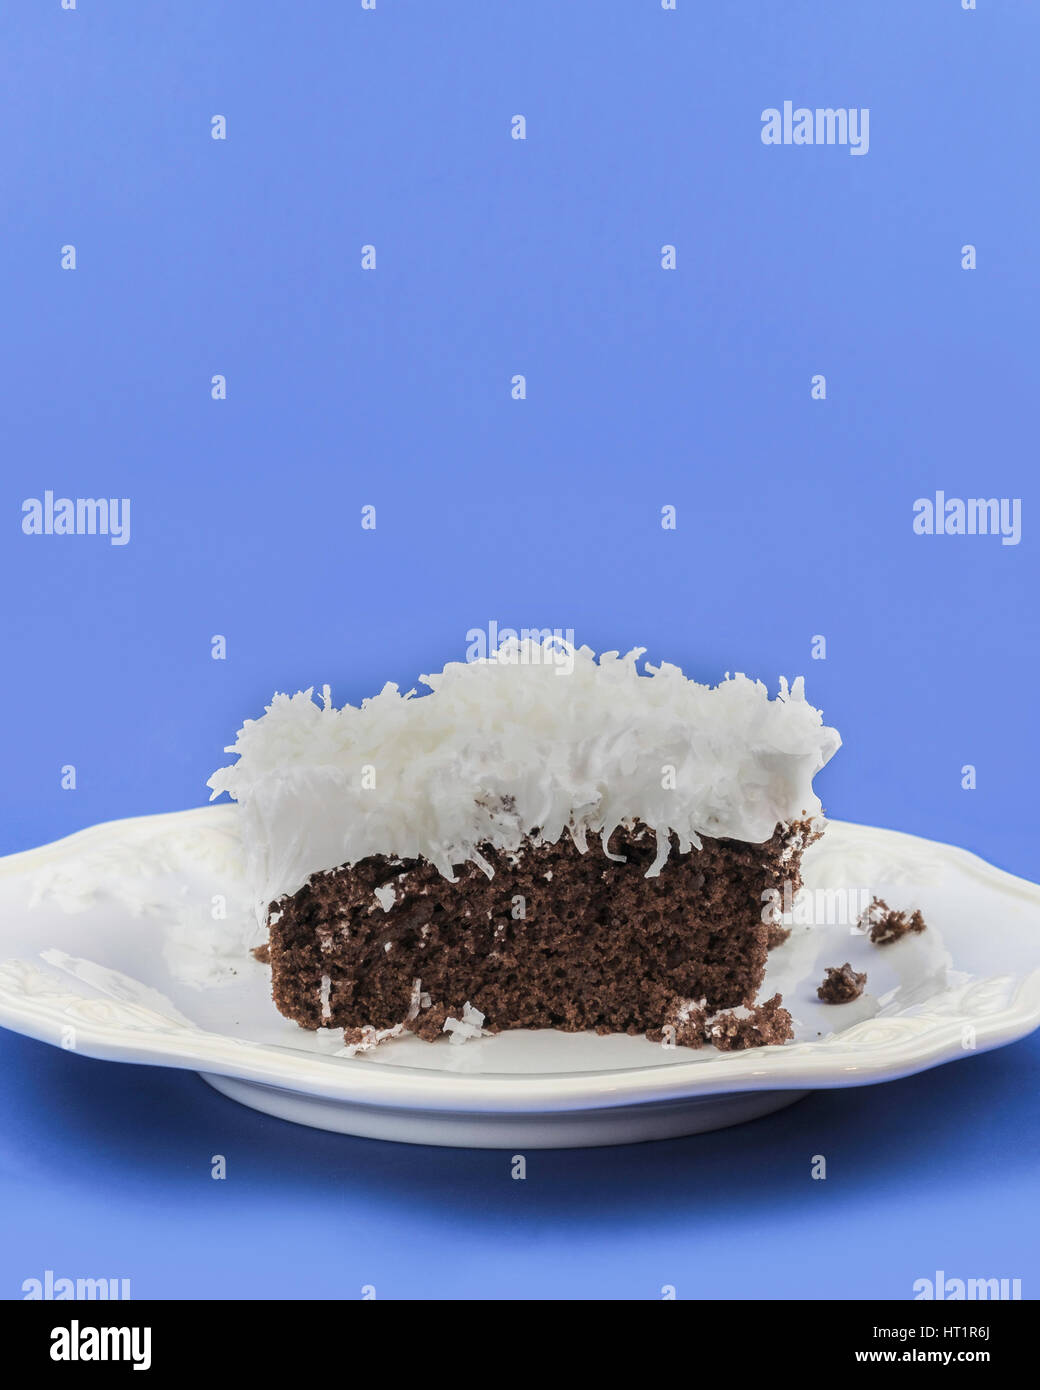 A piece of chocolate cake with fluffy white frosting topped with shreded coconut on a white serving plate. Oklahoma, USA. Stock Photo